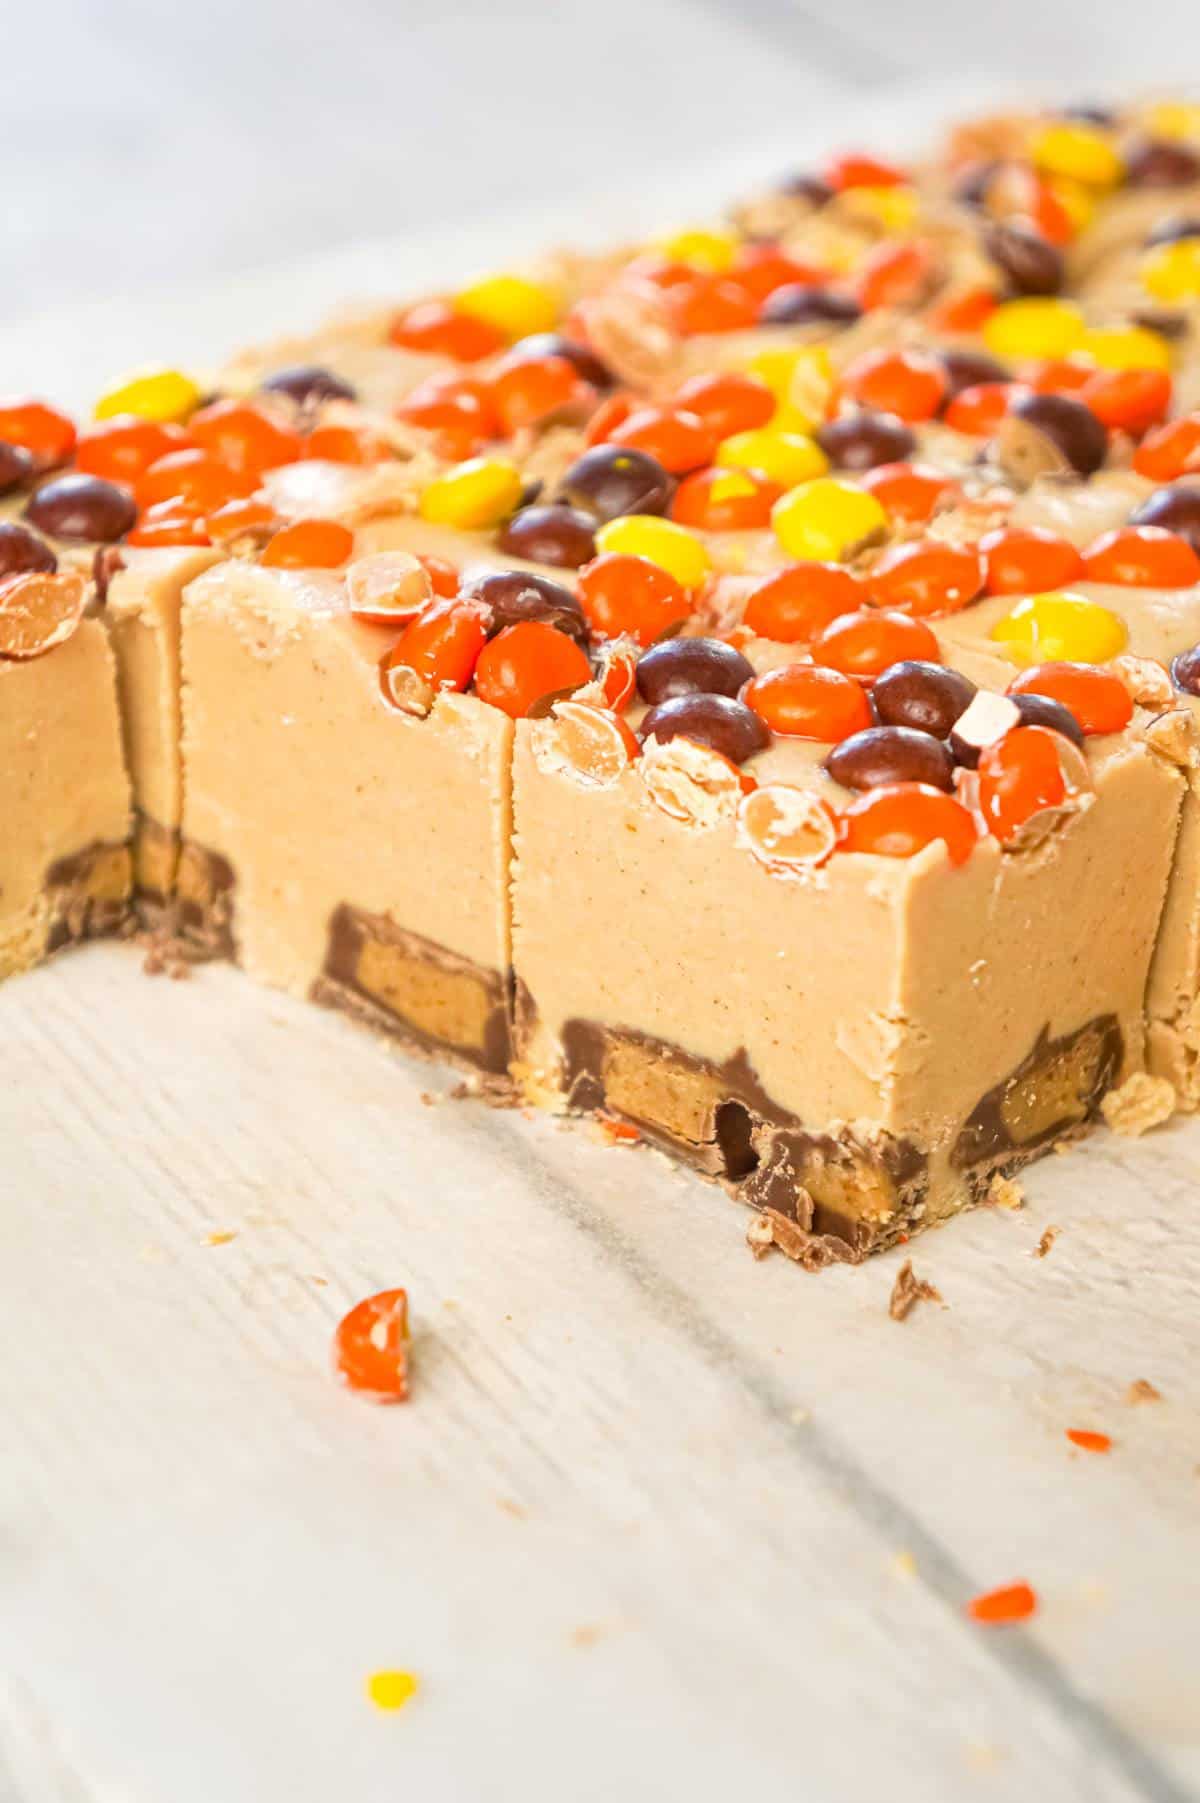 Peanut Butter Cup Fudge is an easy microwave fudge recipe made with vanilla frosting, peanut butter baking chips, smooth peanut butter and loaded with mini Reese's peanut butter cups and mini Reese's pieces.